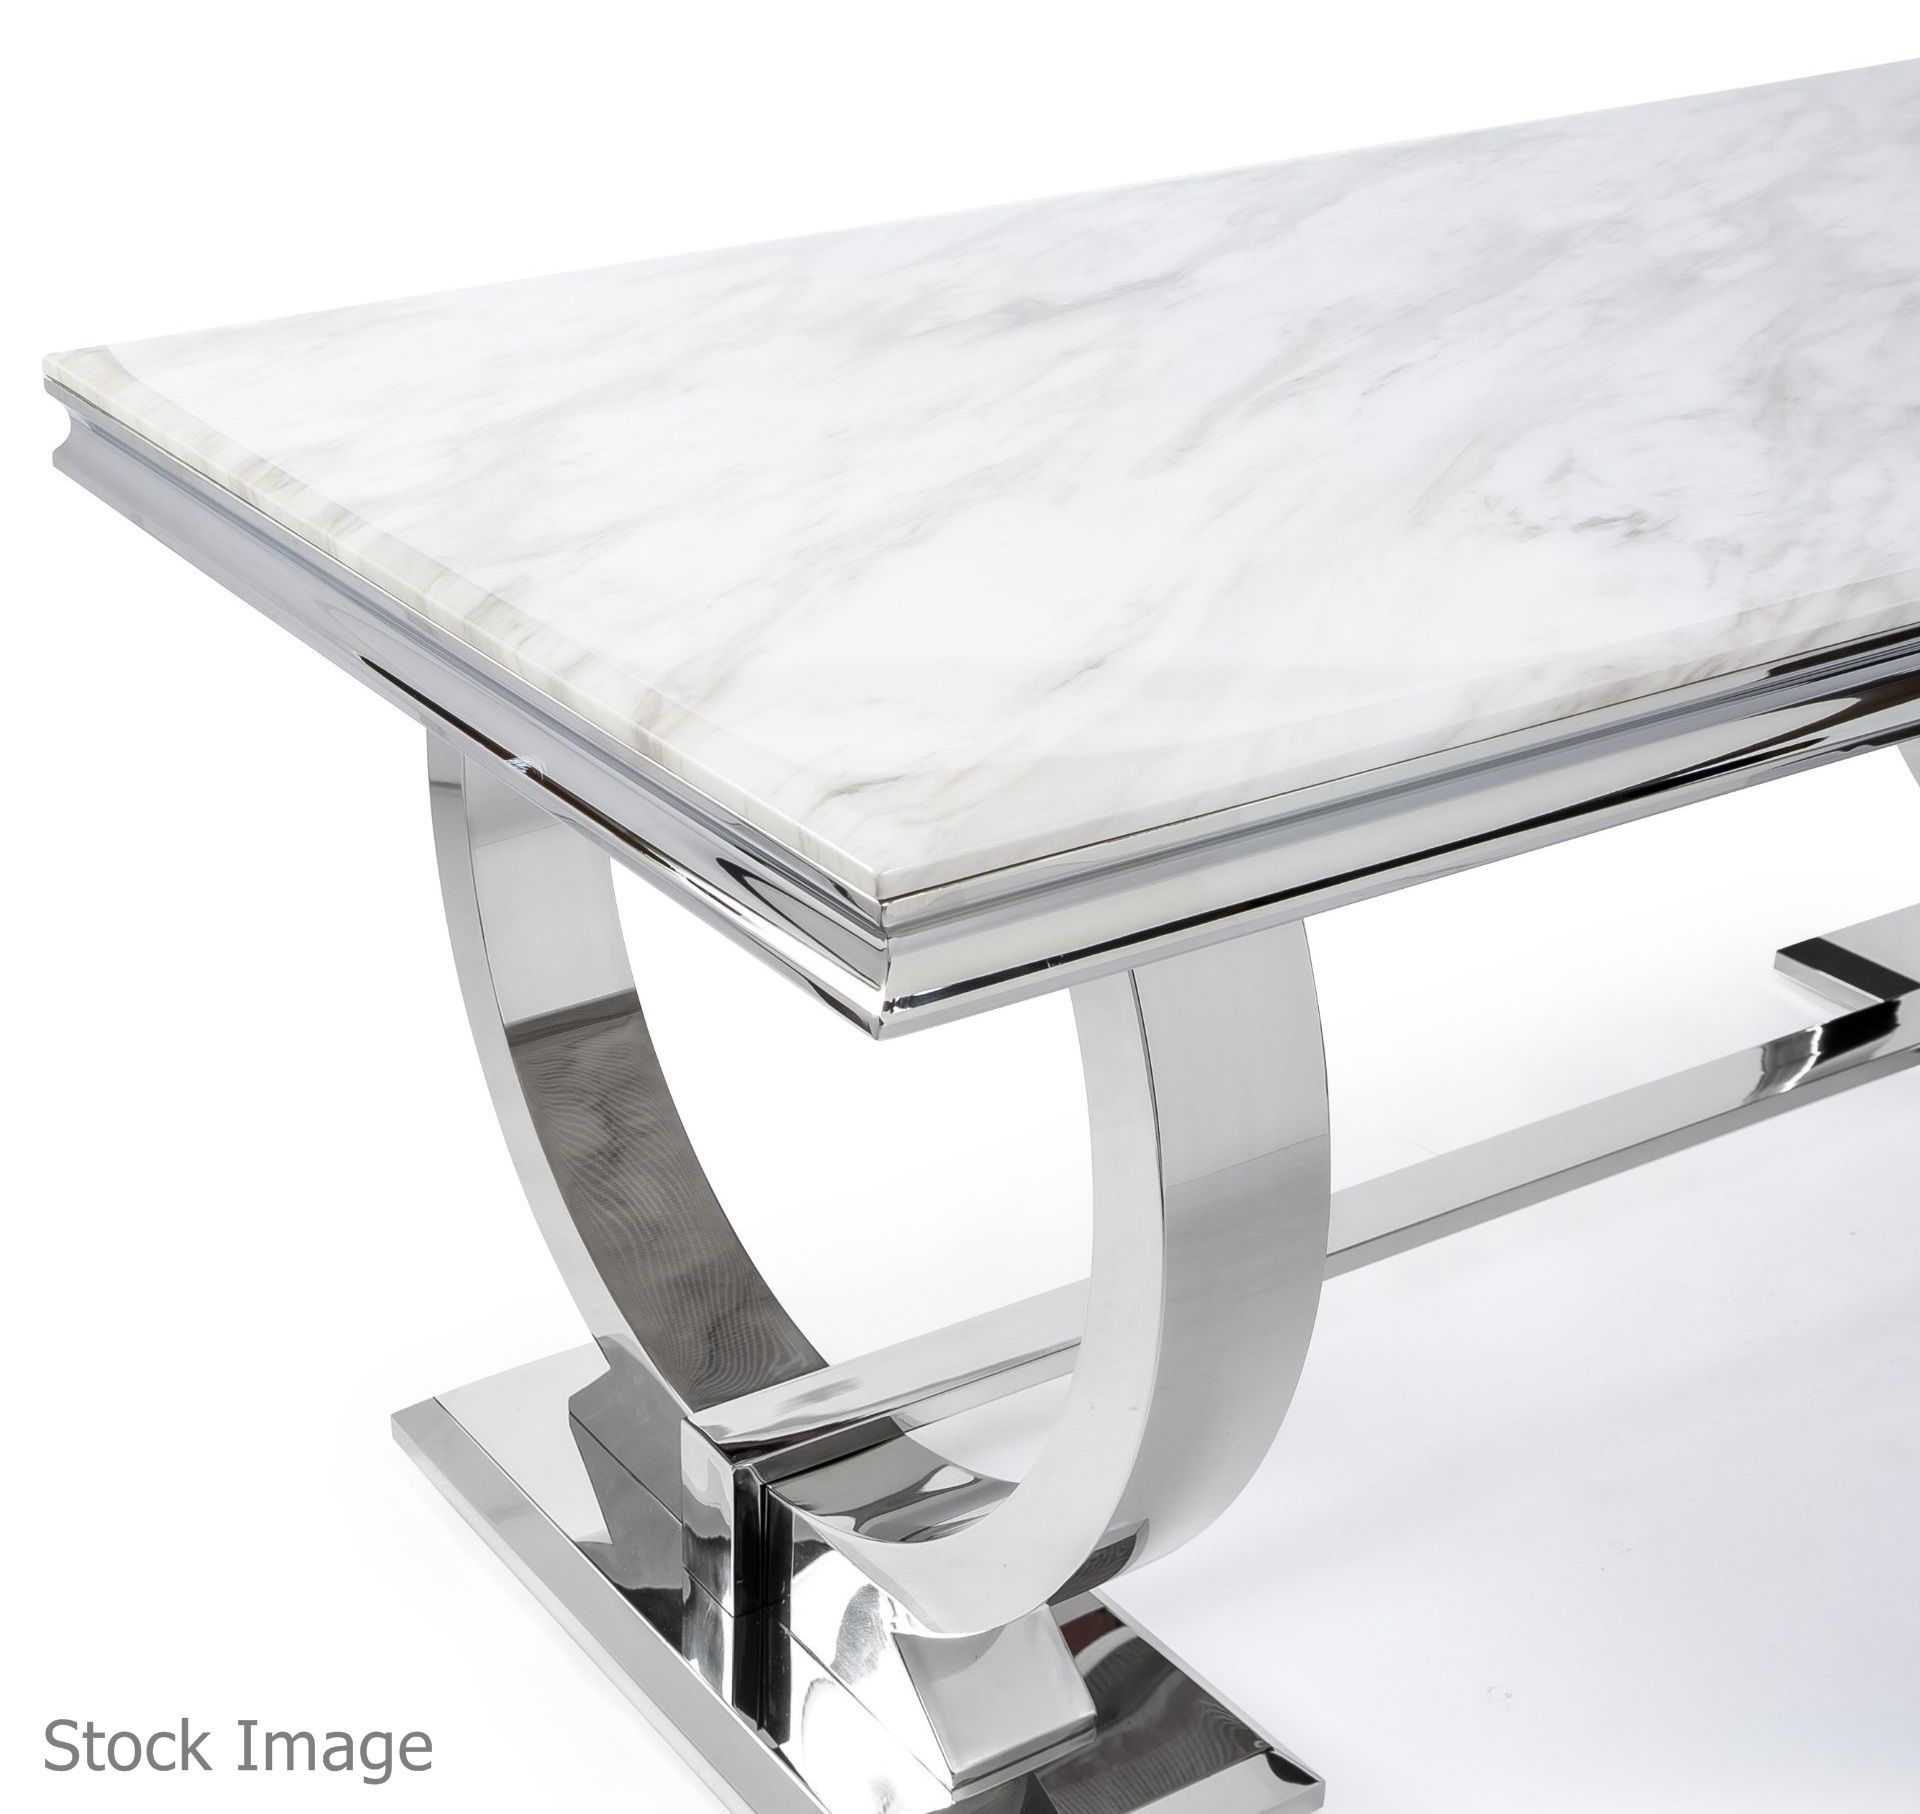 1 x Arianna 2-Metre Long Dining Table With Marble Top With A Chrome Base - Image 11 of 12